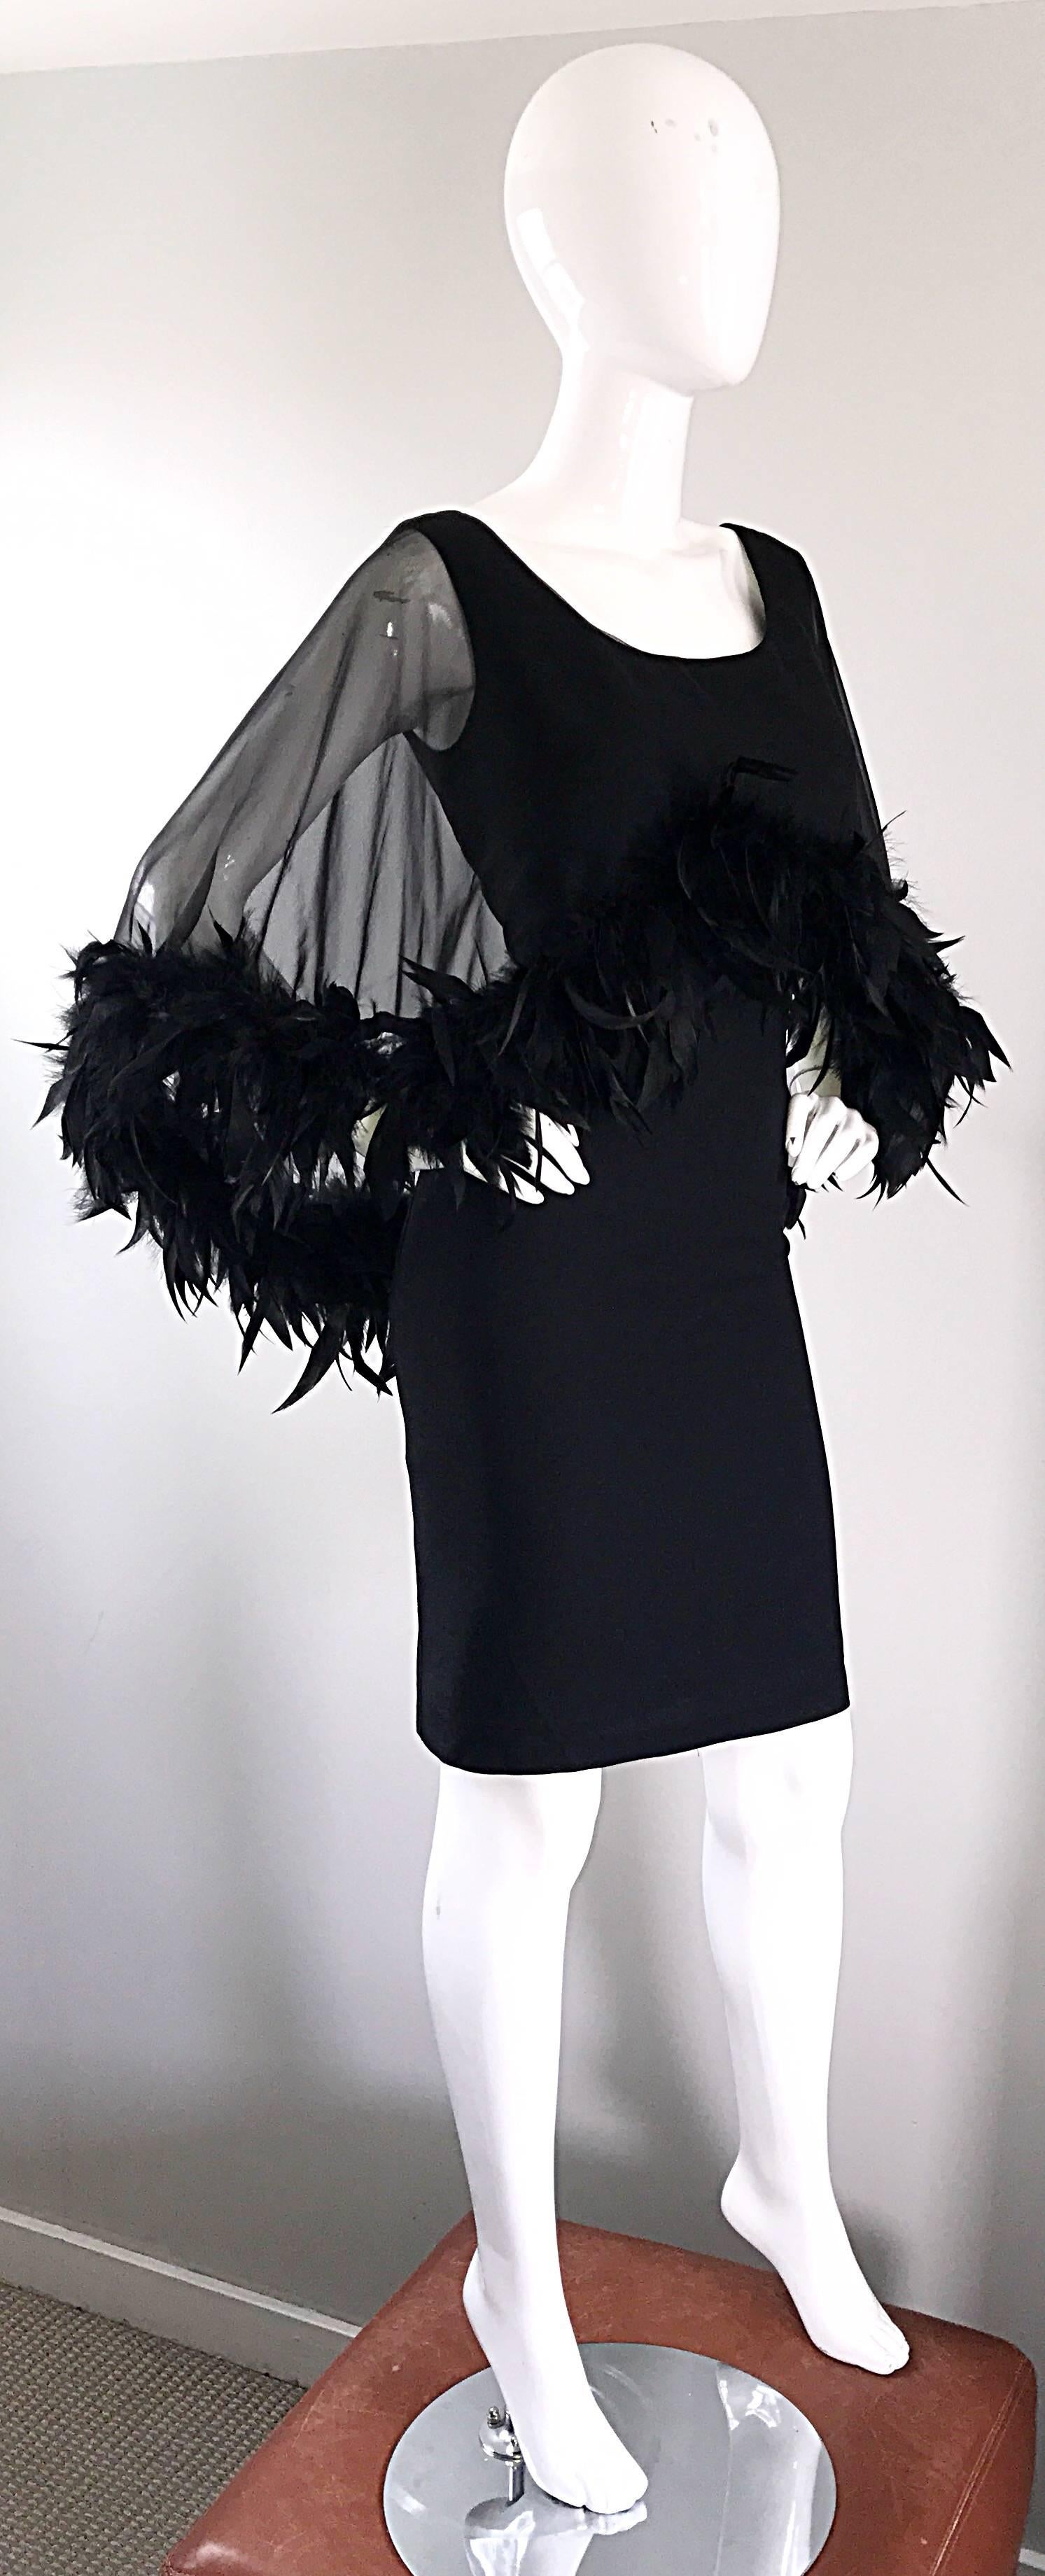 Women's Gorgeous 1950s Demi Couture Black Vintage 50s Dress w/ Sheer Feather Overlay